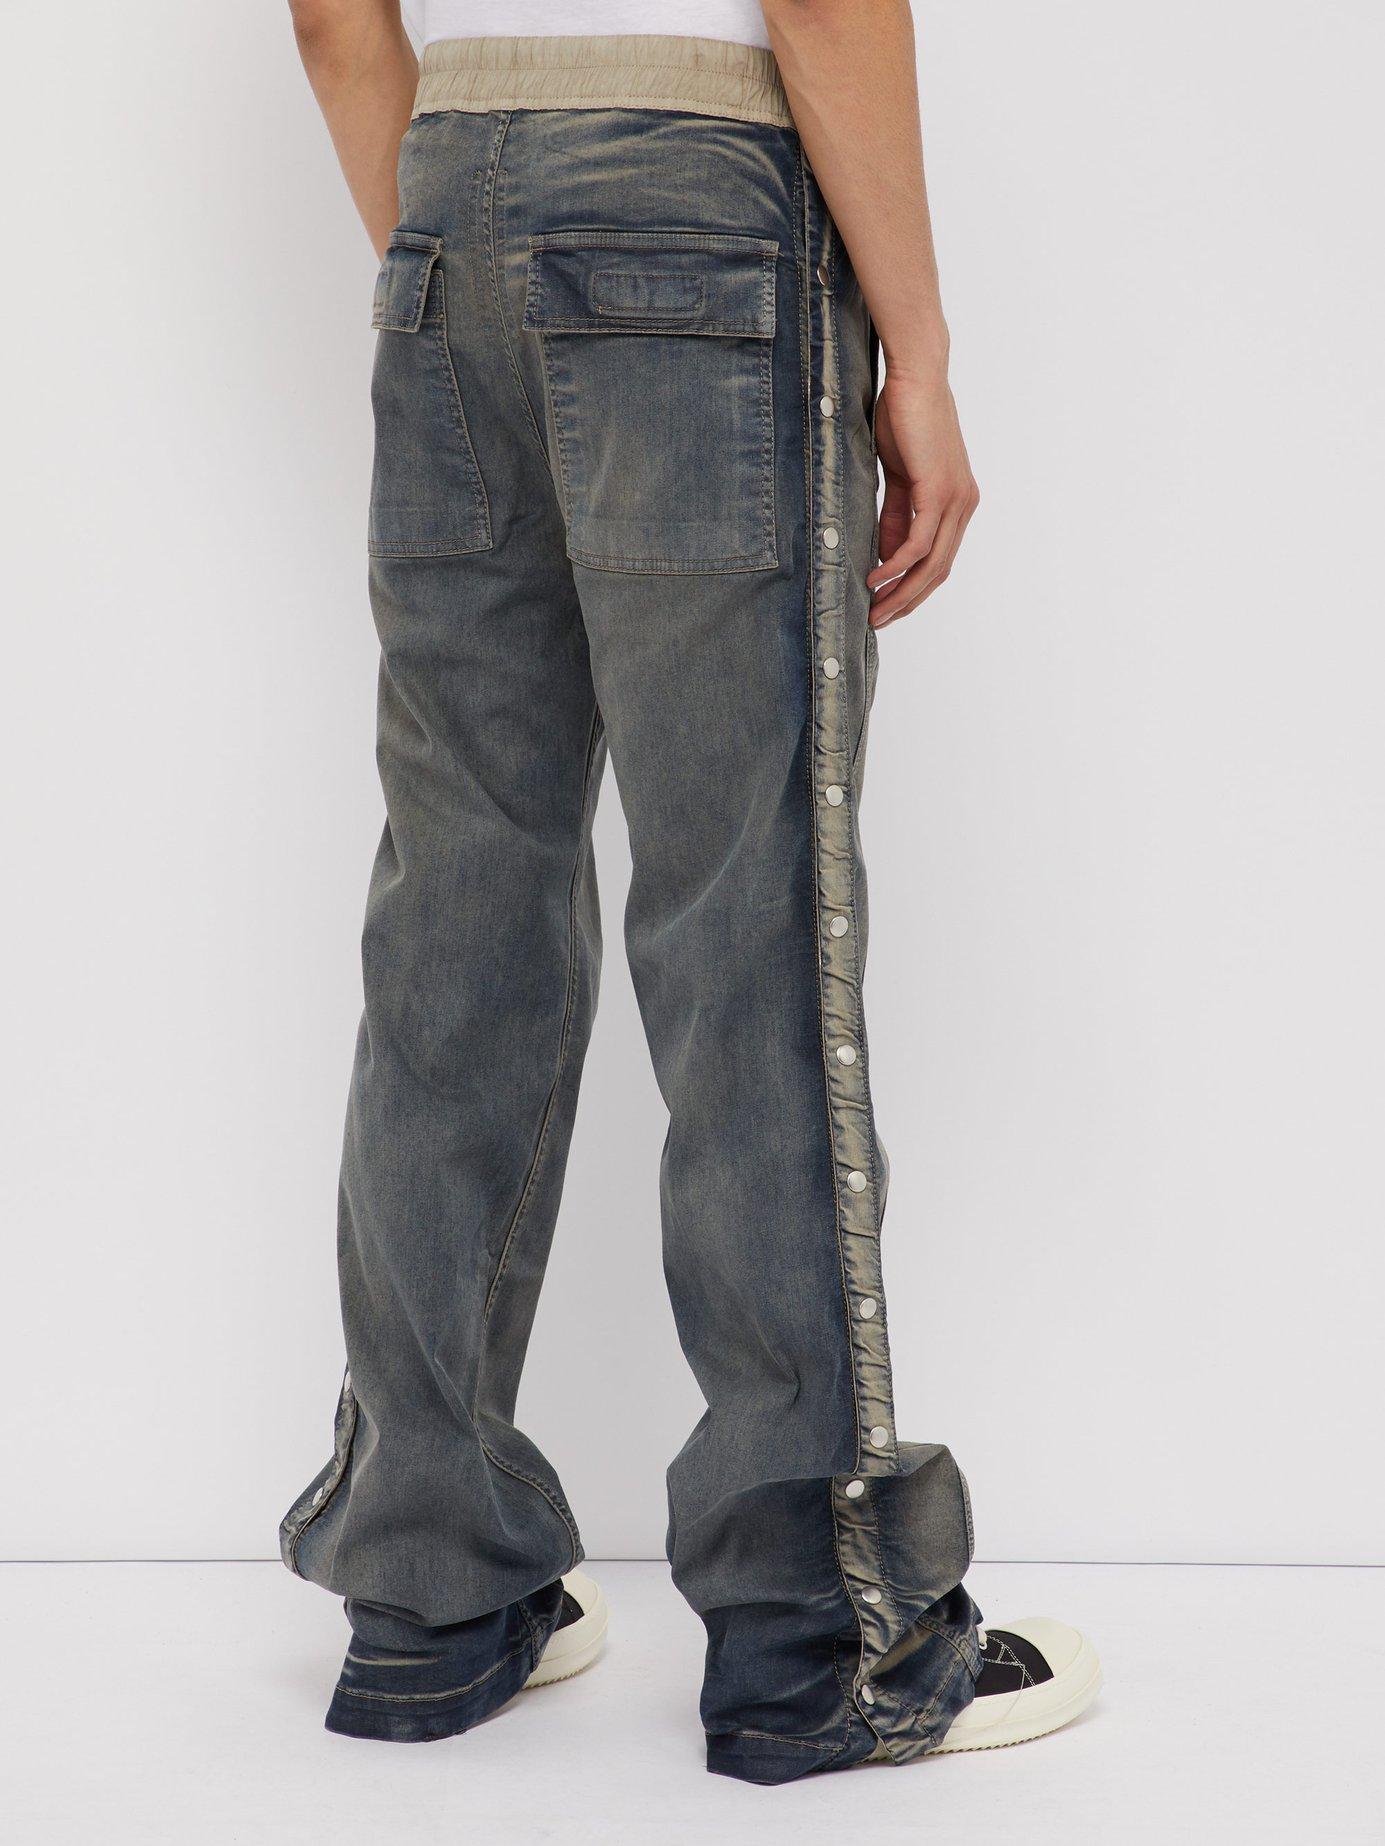 Rick Owens DRKSHDW Easy Pusher Loose Fitting Jeans in Gray for Men